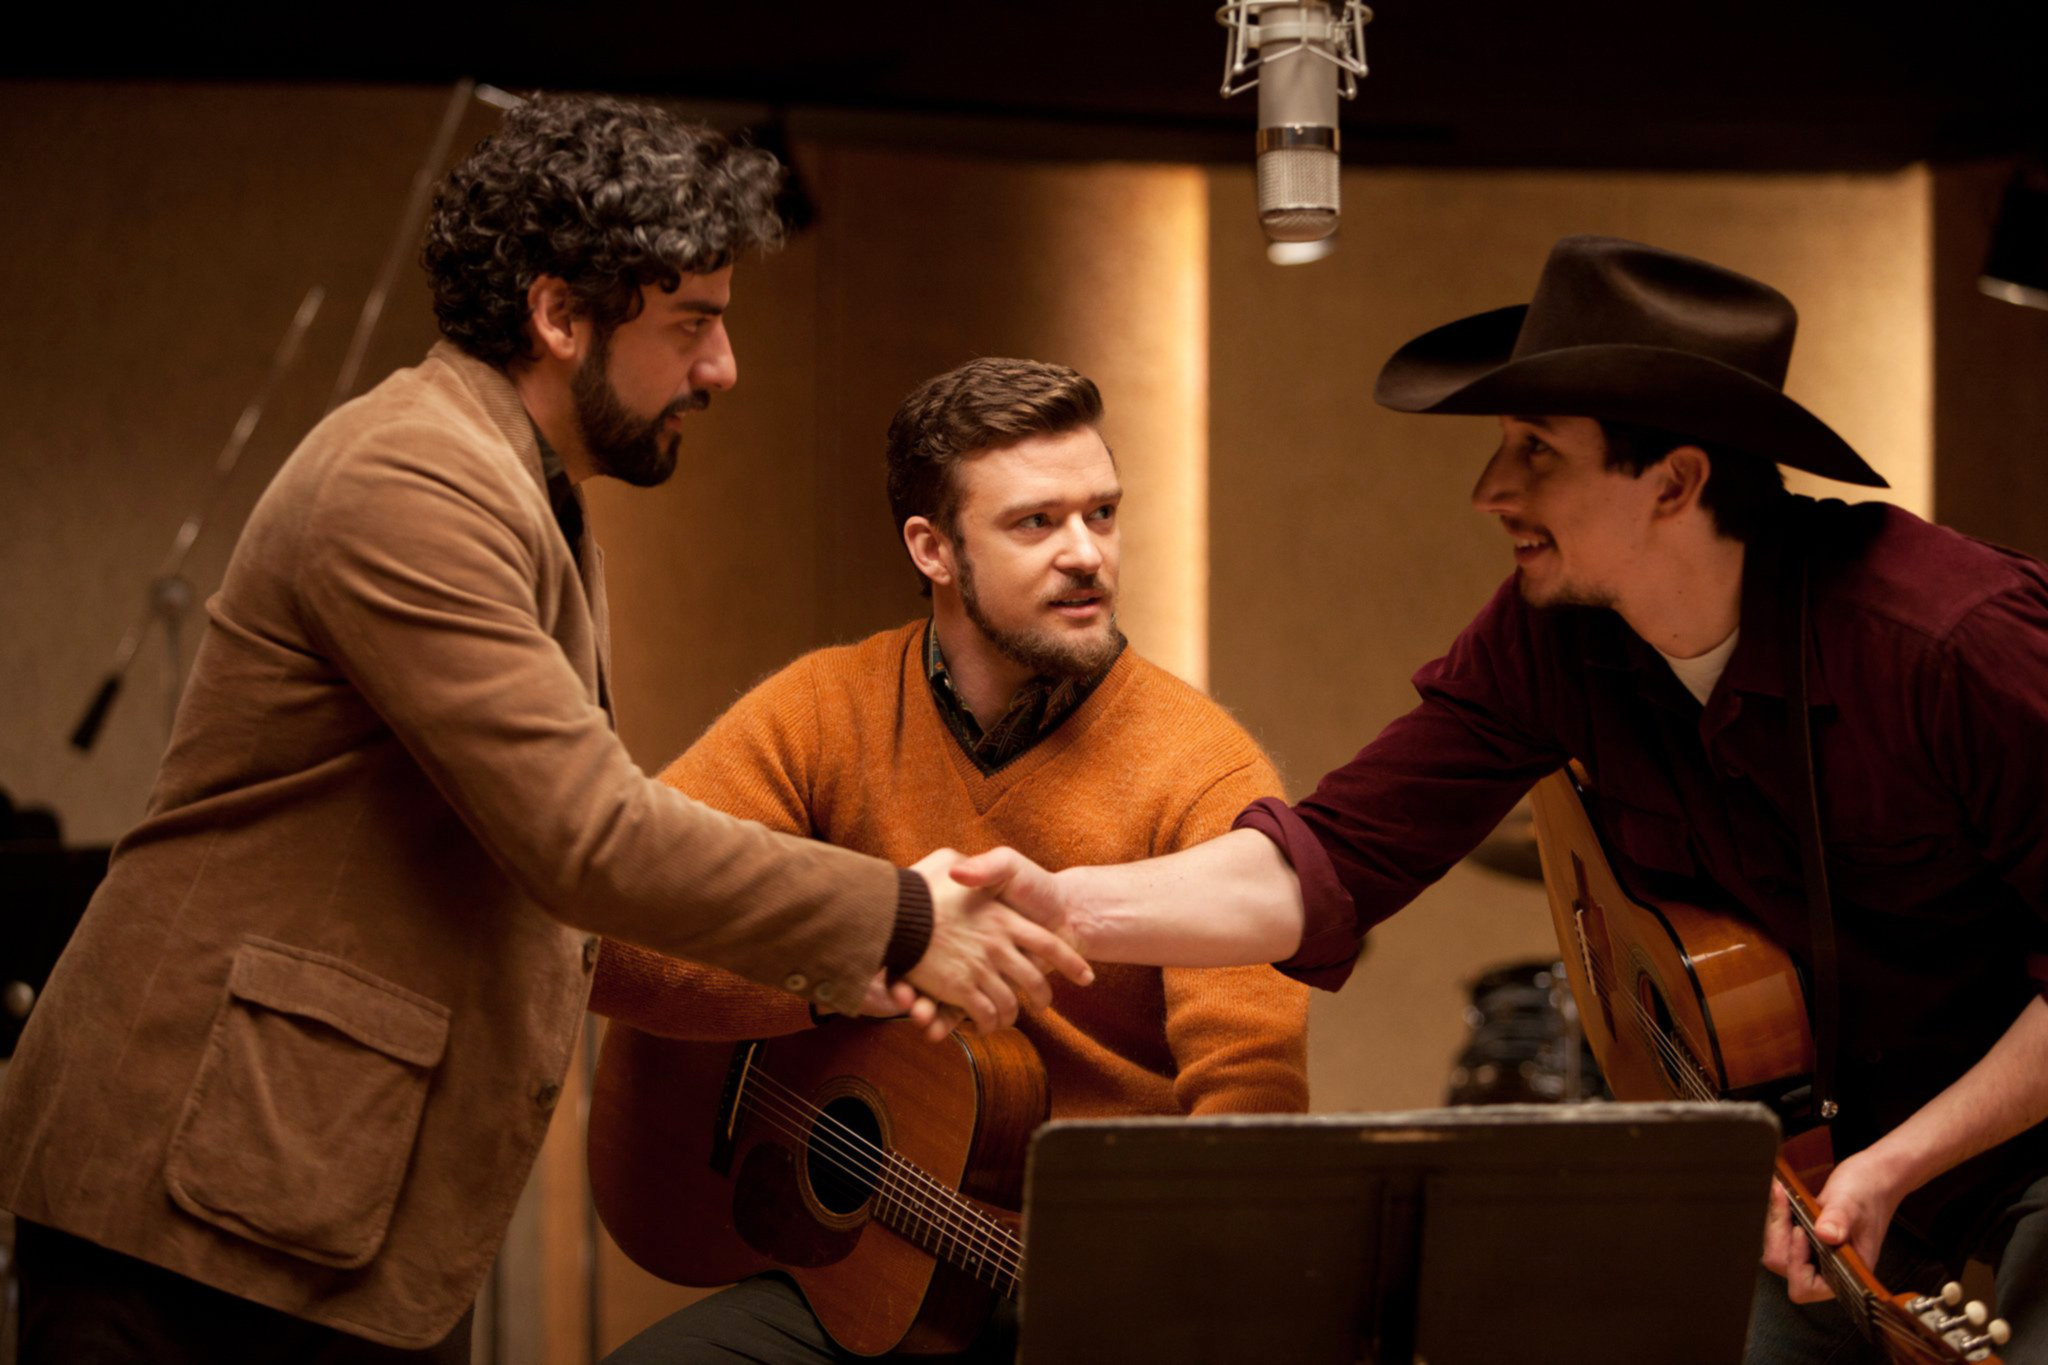 Justin Timberlake holds a guitar while Oscar Isaac and Adam Driver shake hands in front of him